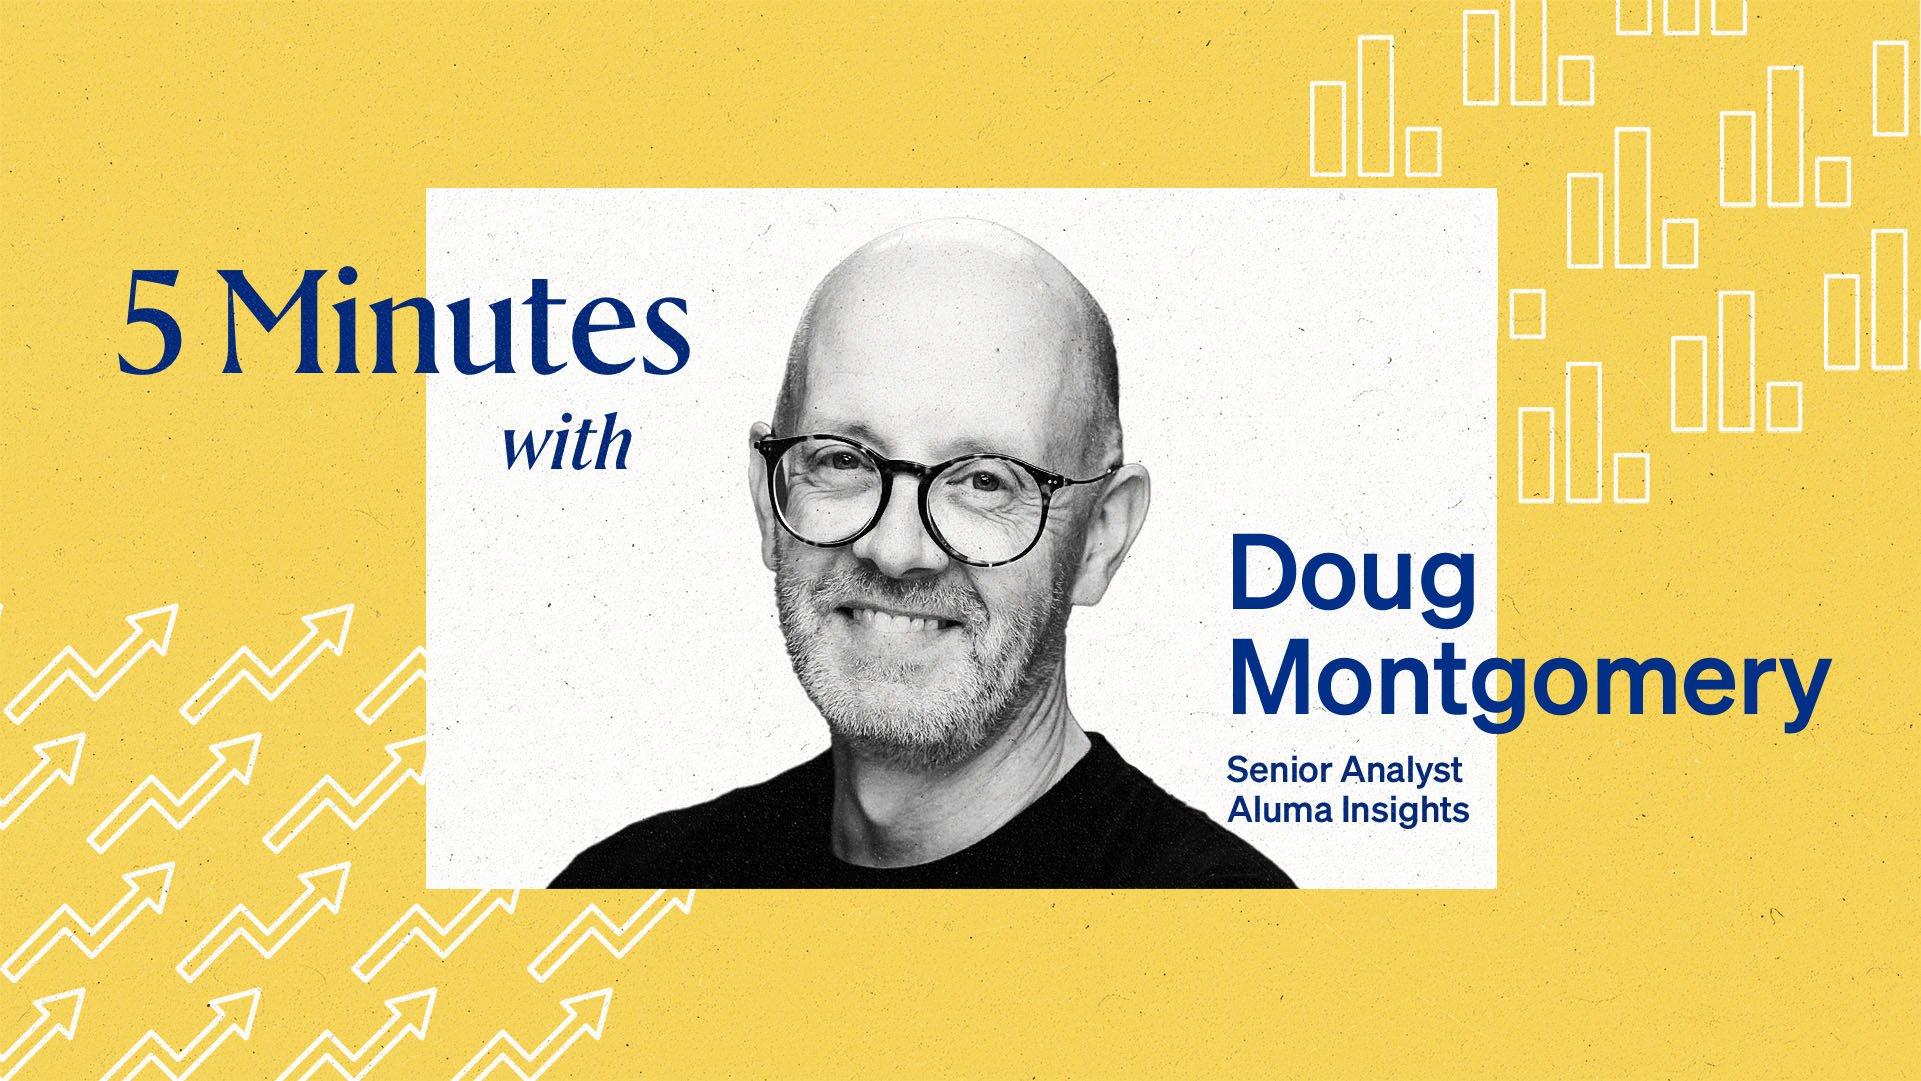 5 minutes with Doug Montgomery, Senior Analyst at Alumna Insights.